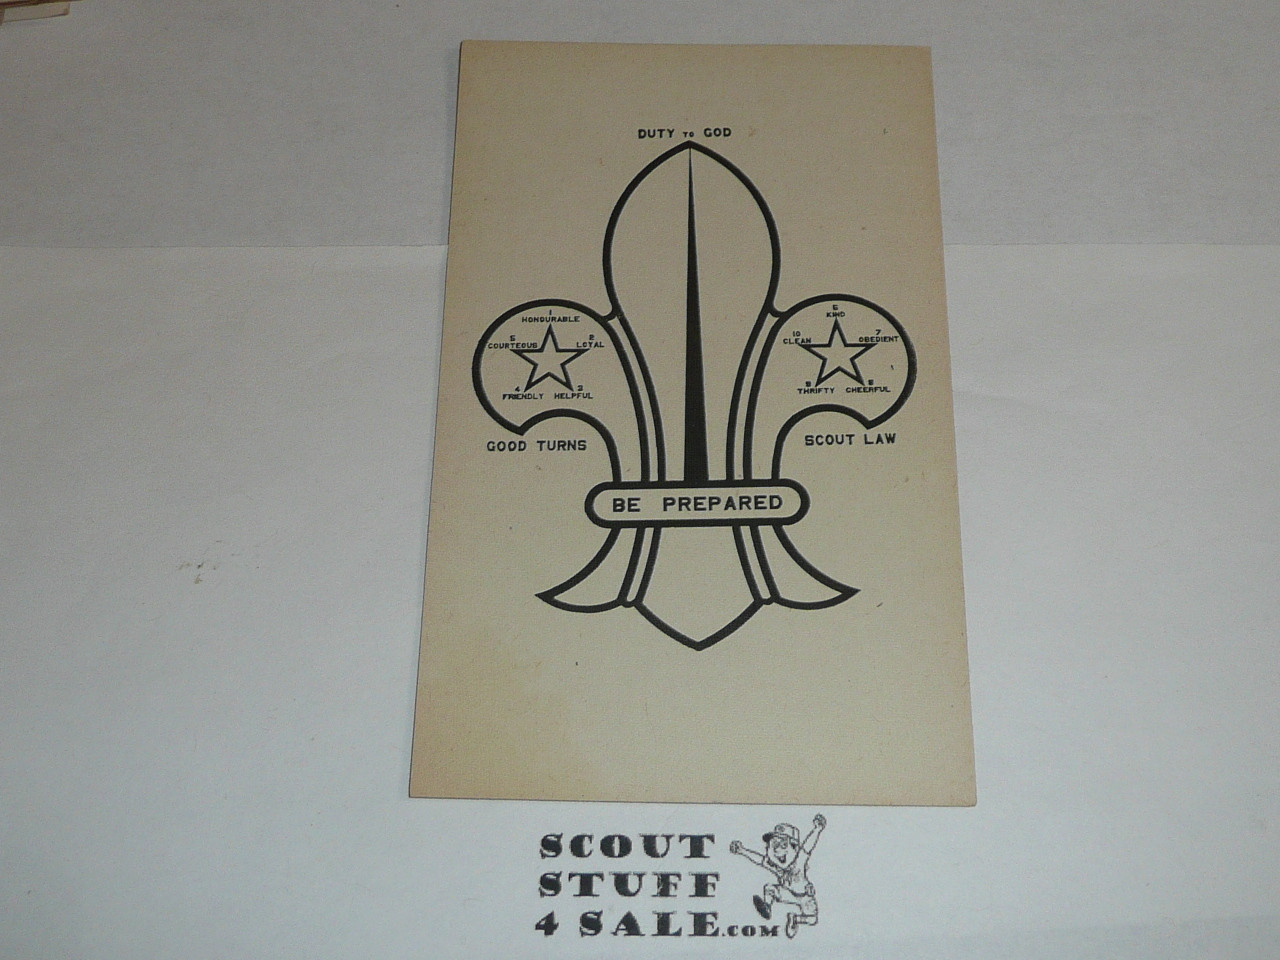 British Boy Scout Postcard of the Emblem and what the parts stand for